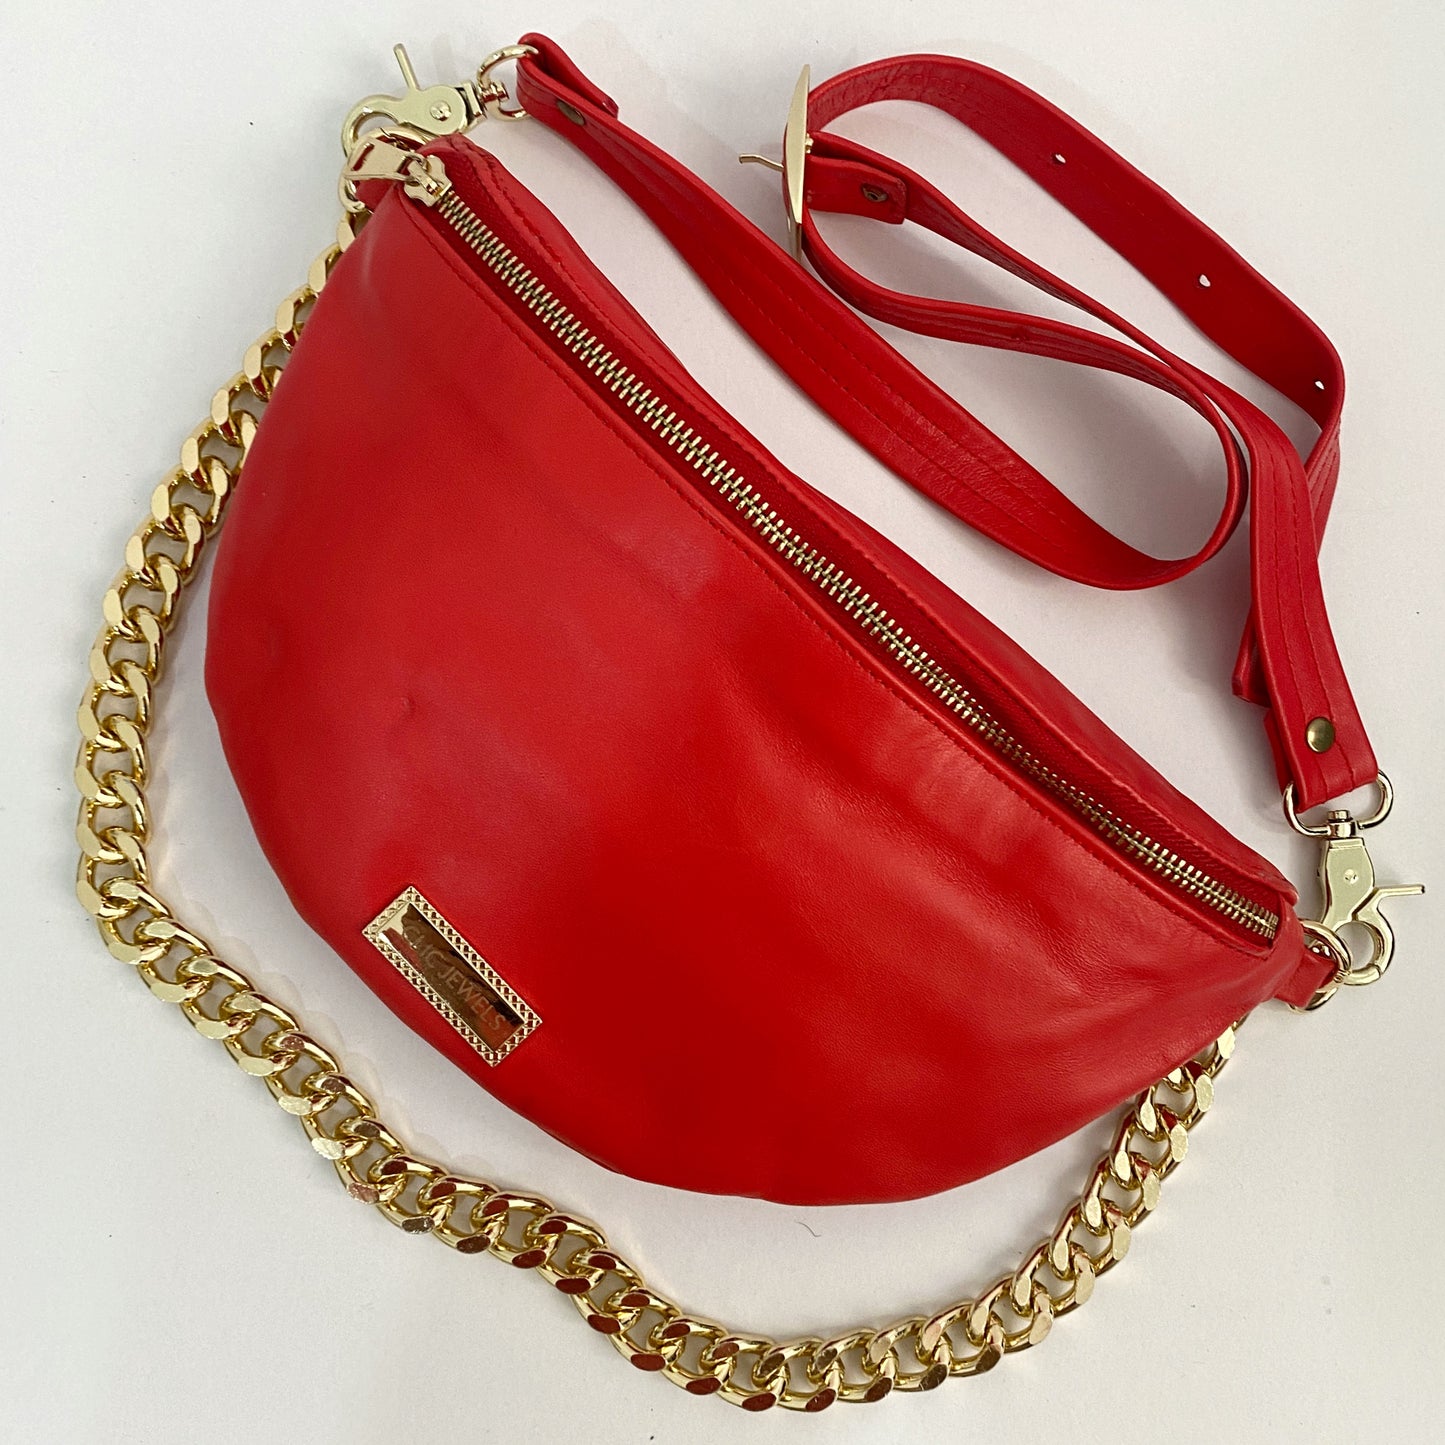 SMALL BELTBAG (red soft genuine leather)